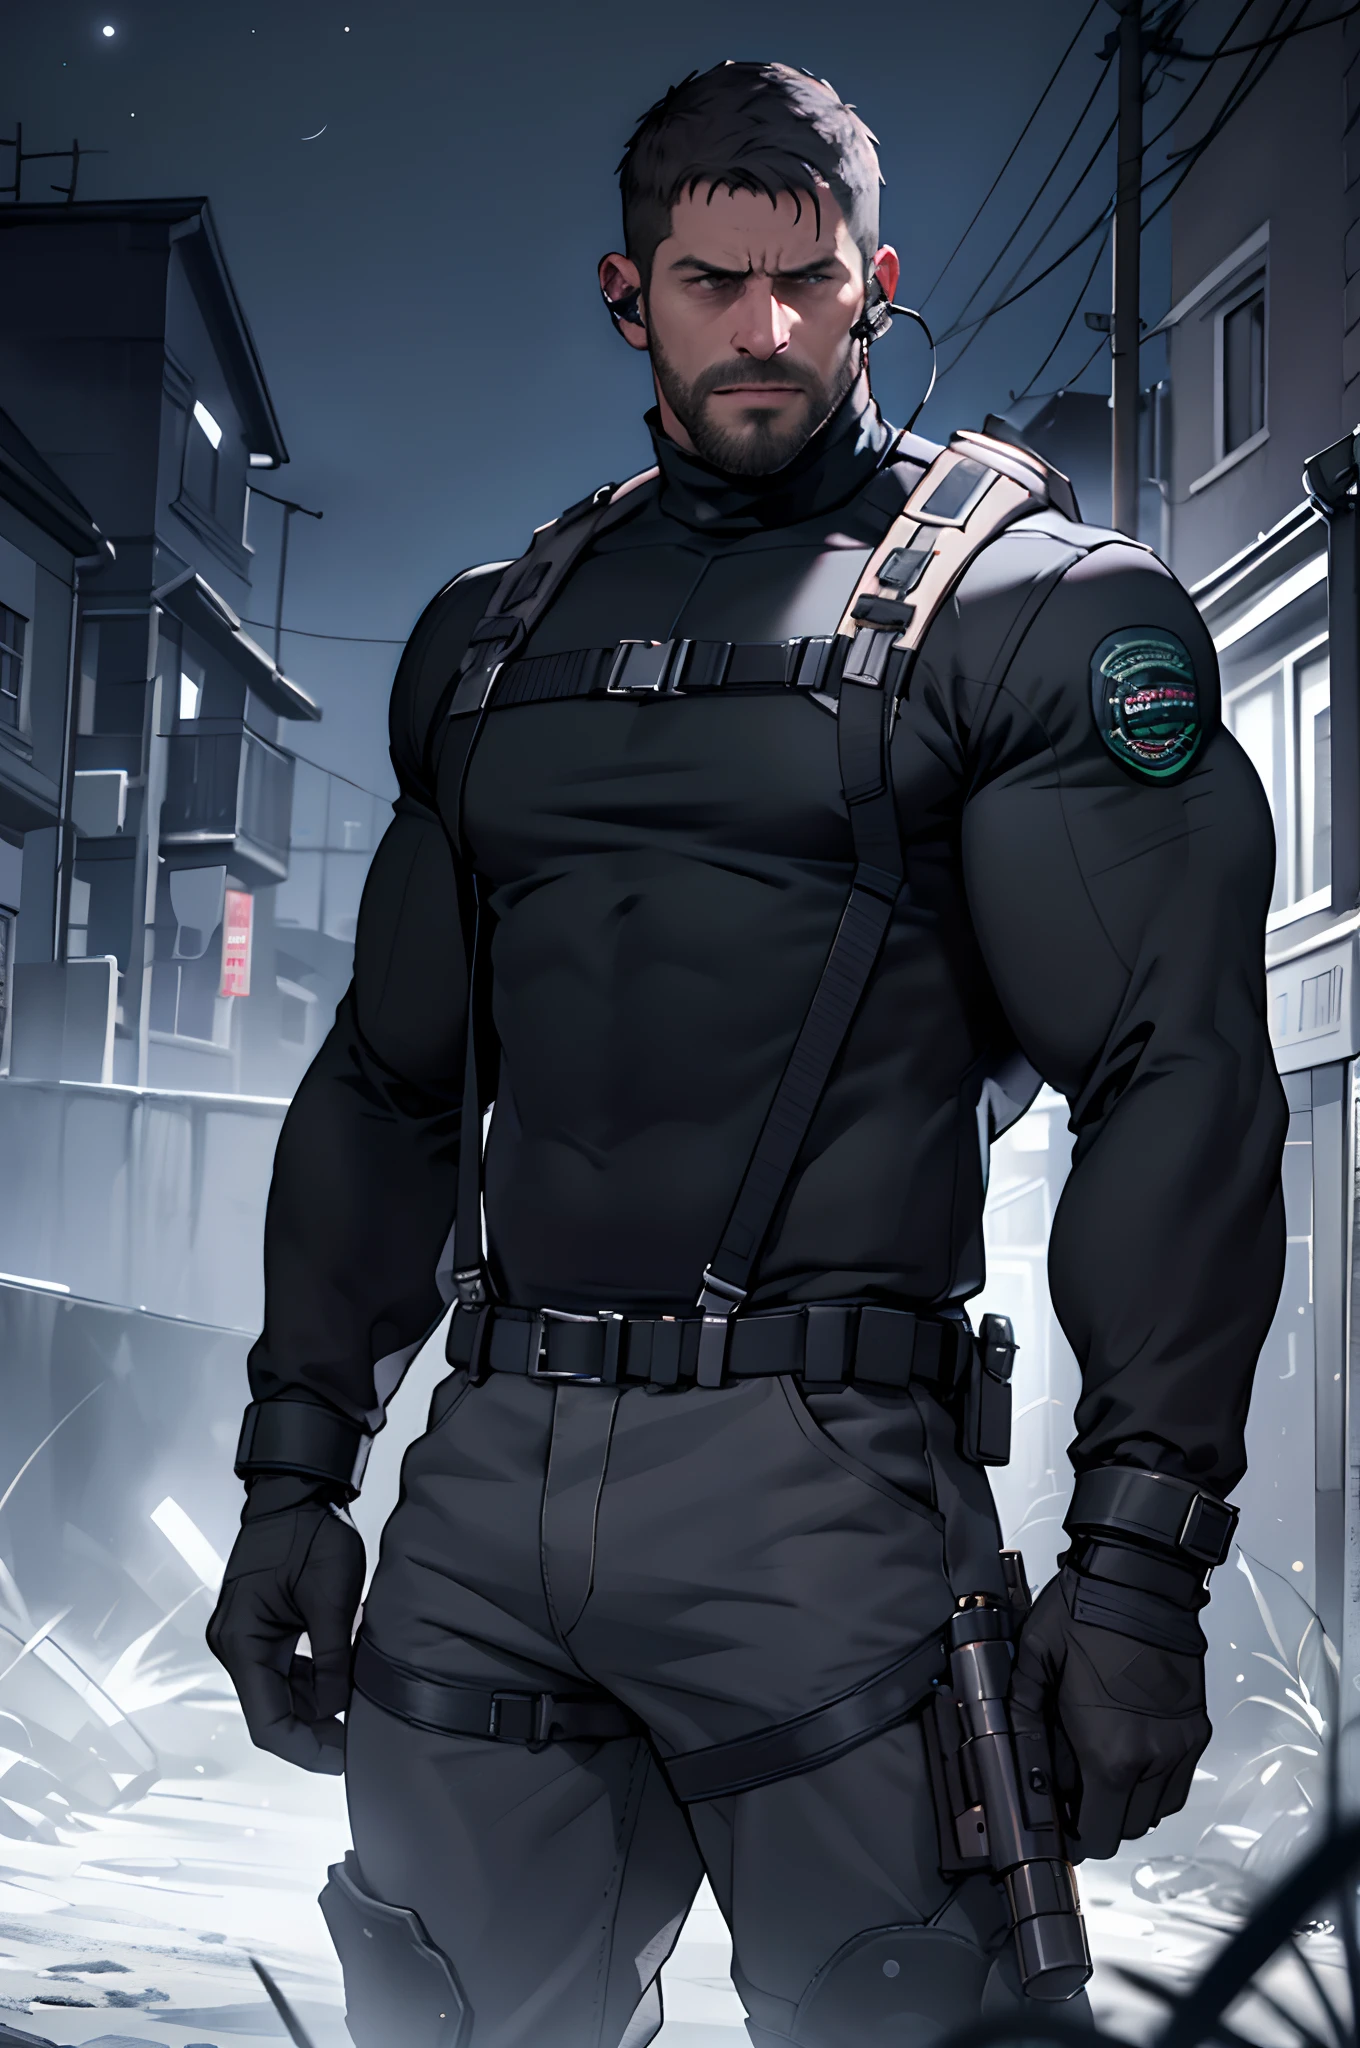 Dark gothic village in the background, ((old)) Chris Redfield from Resident Evil 8, 48 year old, muscular male, tall and hunk, biceps, abs, chest, black cold turtleneck, black trousers, suspenders, earpiece, belt, thick beard, hanging an assault rifle on the back, cold face, video games style, high resolution:1.2, best quality, masterpiece, (dark:1.2), (nightime:1.5), dark atmosphere, shadows, upper body shot